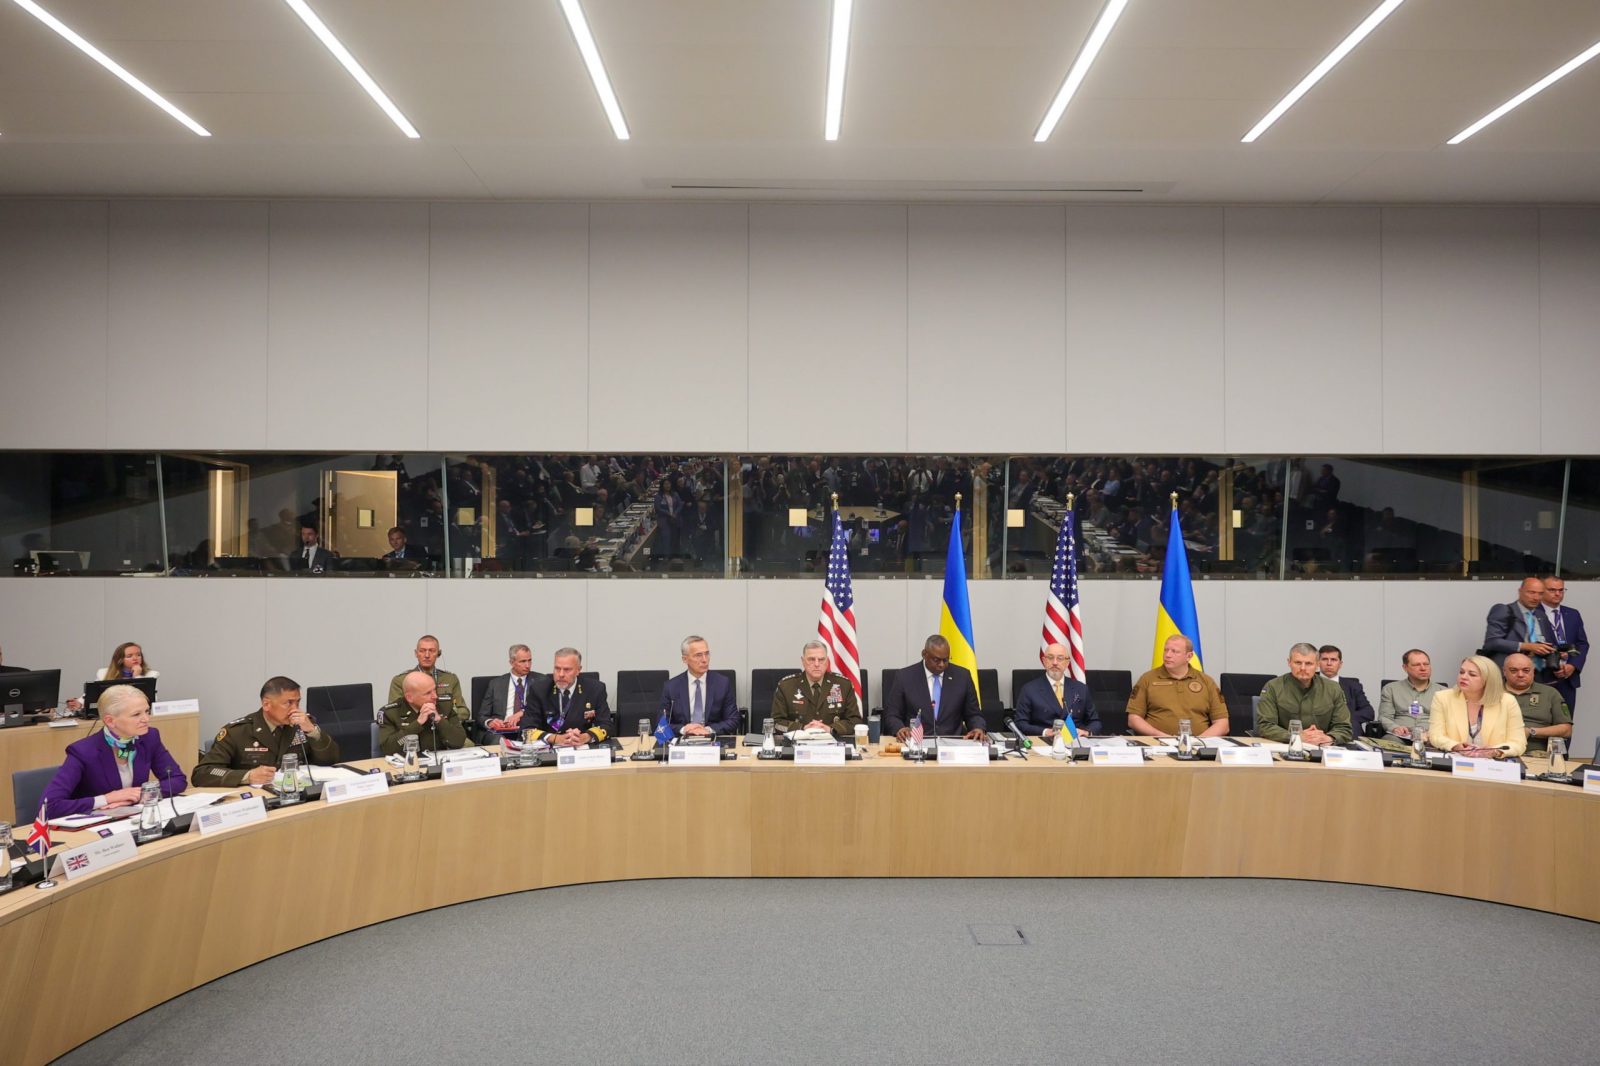 epa10691905 A general view shows the meeting of the Ukraine Defense Contact Group room during the NATO Defense Ministers Council at the North Atlantic Treaty Organization (NATO) headquarters in Brussels, 15 June 2023. NATO defence ministers meet for two days to discuss their support for Ukraine and ways to strengthen the defence of the alliance's eastern flank bordering Russia. The meeting of the Ukraine Contact Group is held to increase the military help for Ukraine.  EPA/OLIVIER MATTHYS